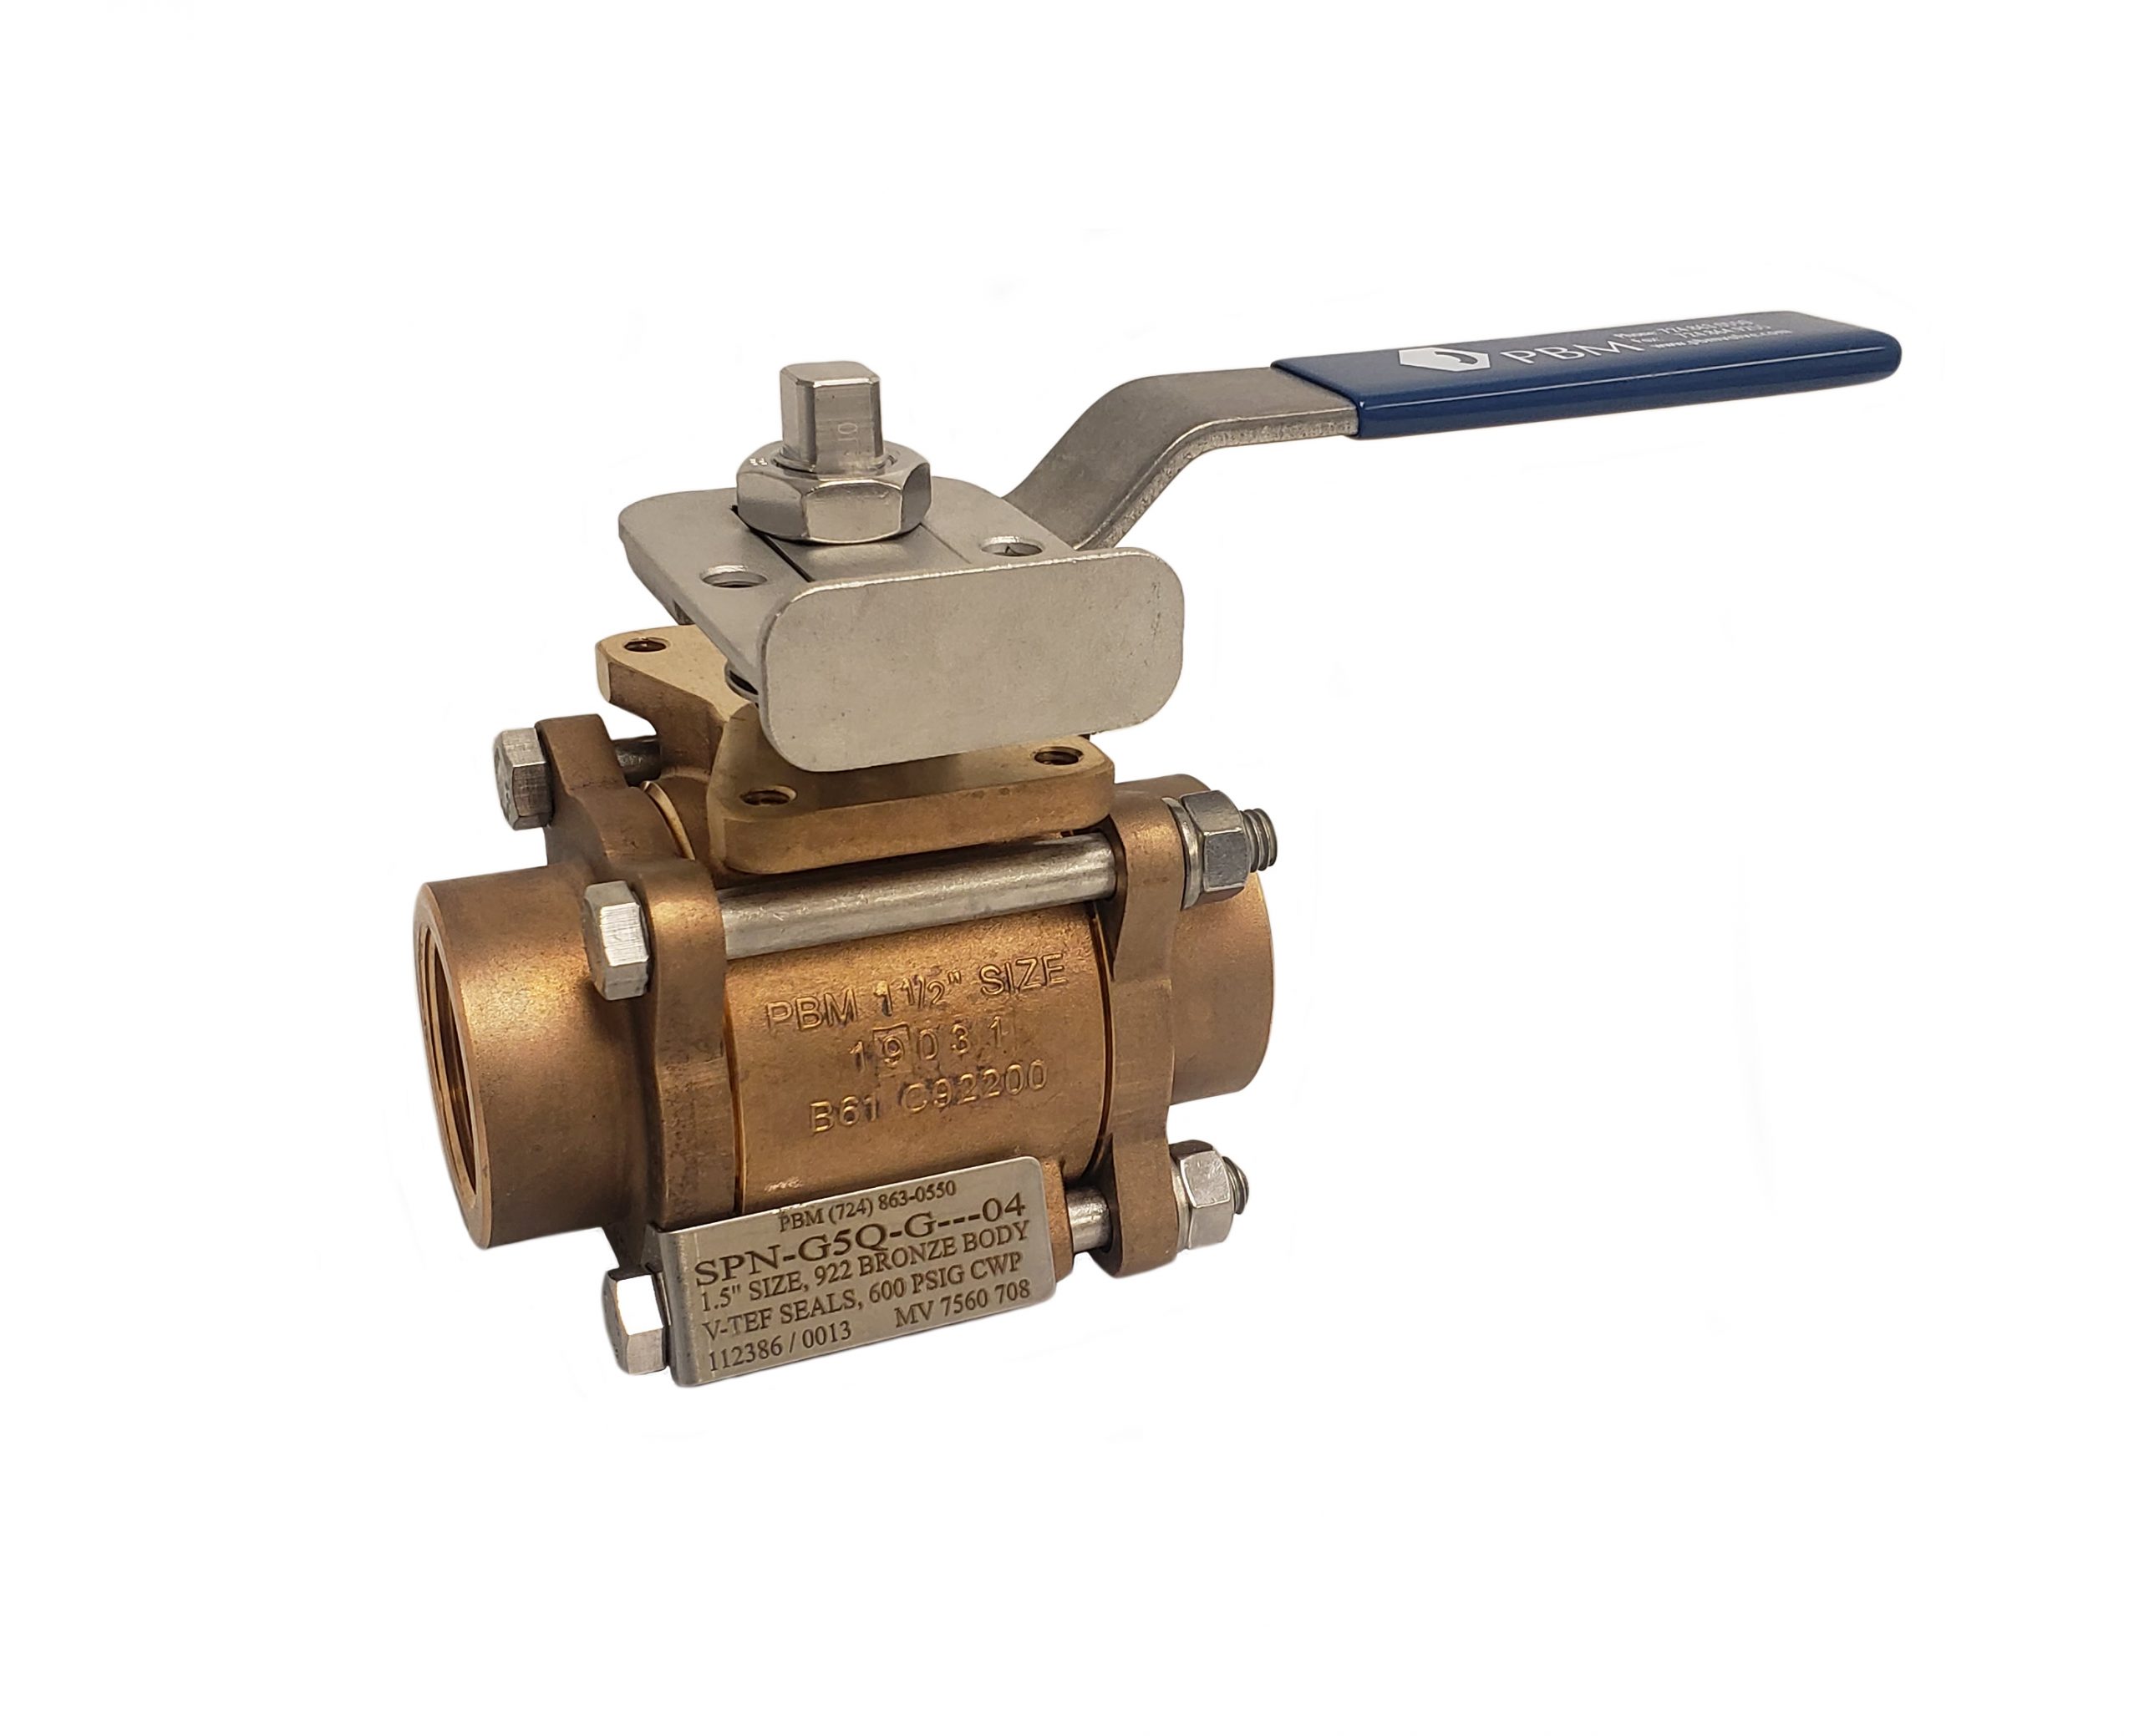 What Does High Pressure Valves Mean?